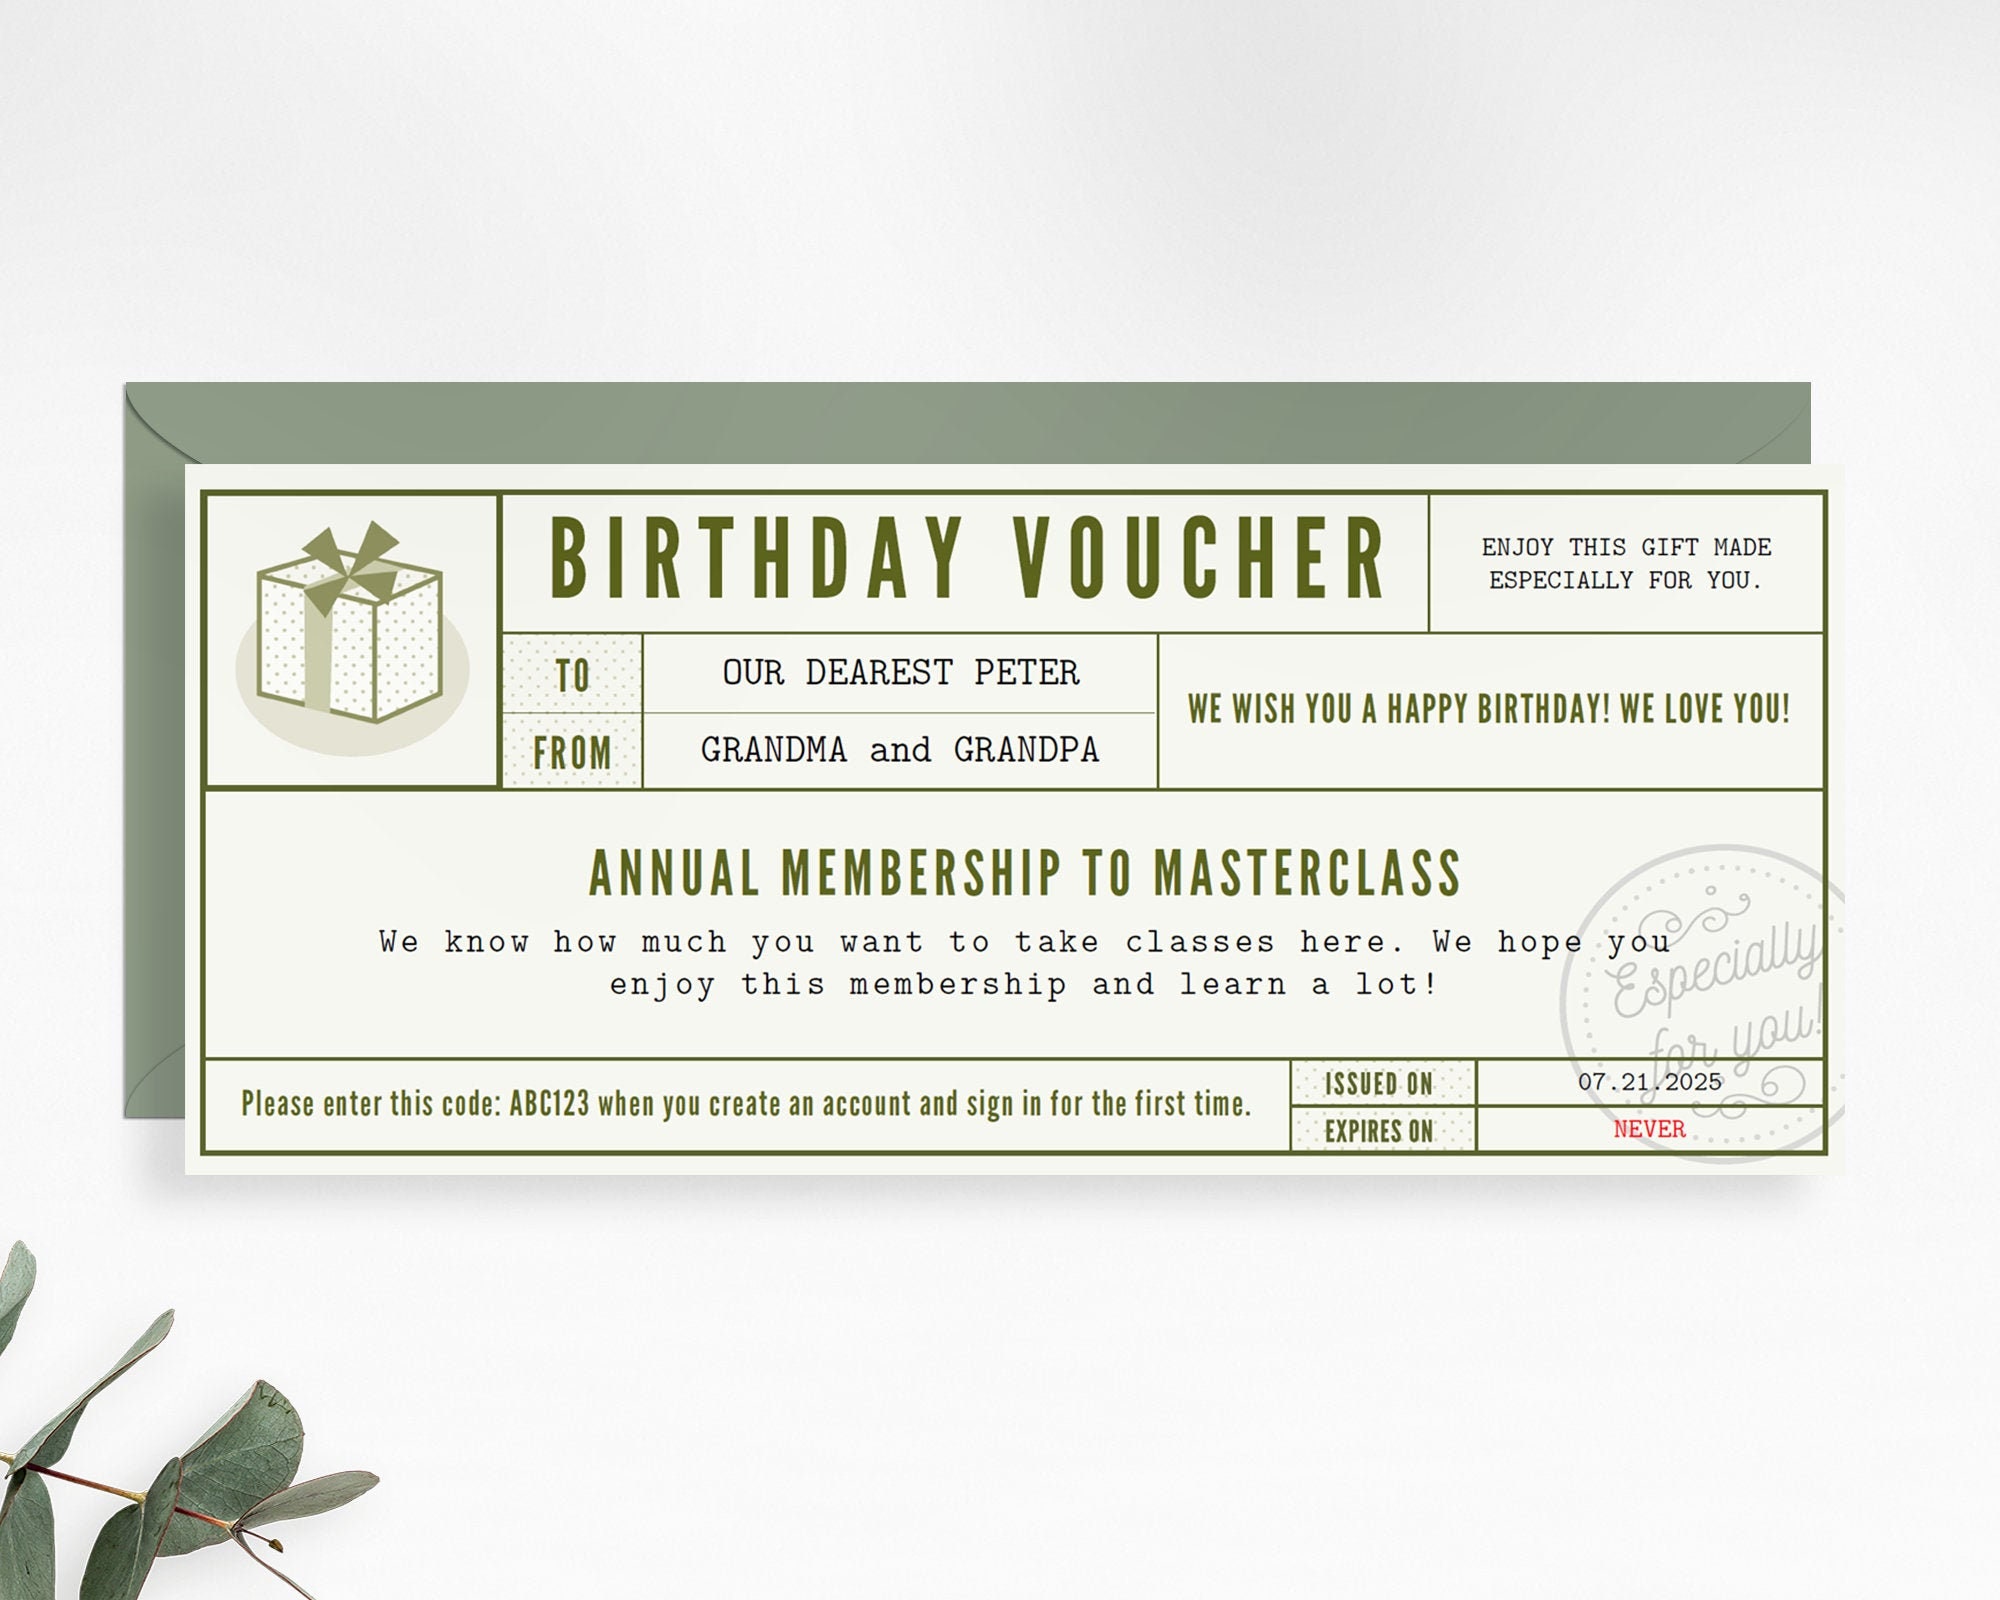 Birthday Gift Voucher / Gift Certificate Template in PDF / 21 x 21.21 / for  Print / Gift Coupon / Digital Download / Adobe Reader Required In This Certificate Entitles The Bearer Template